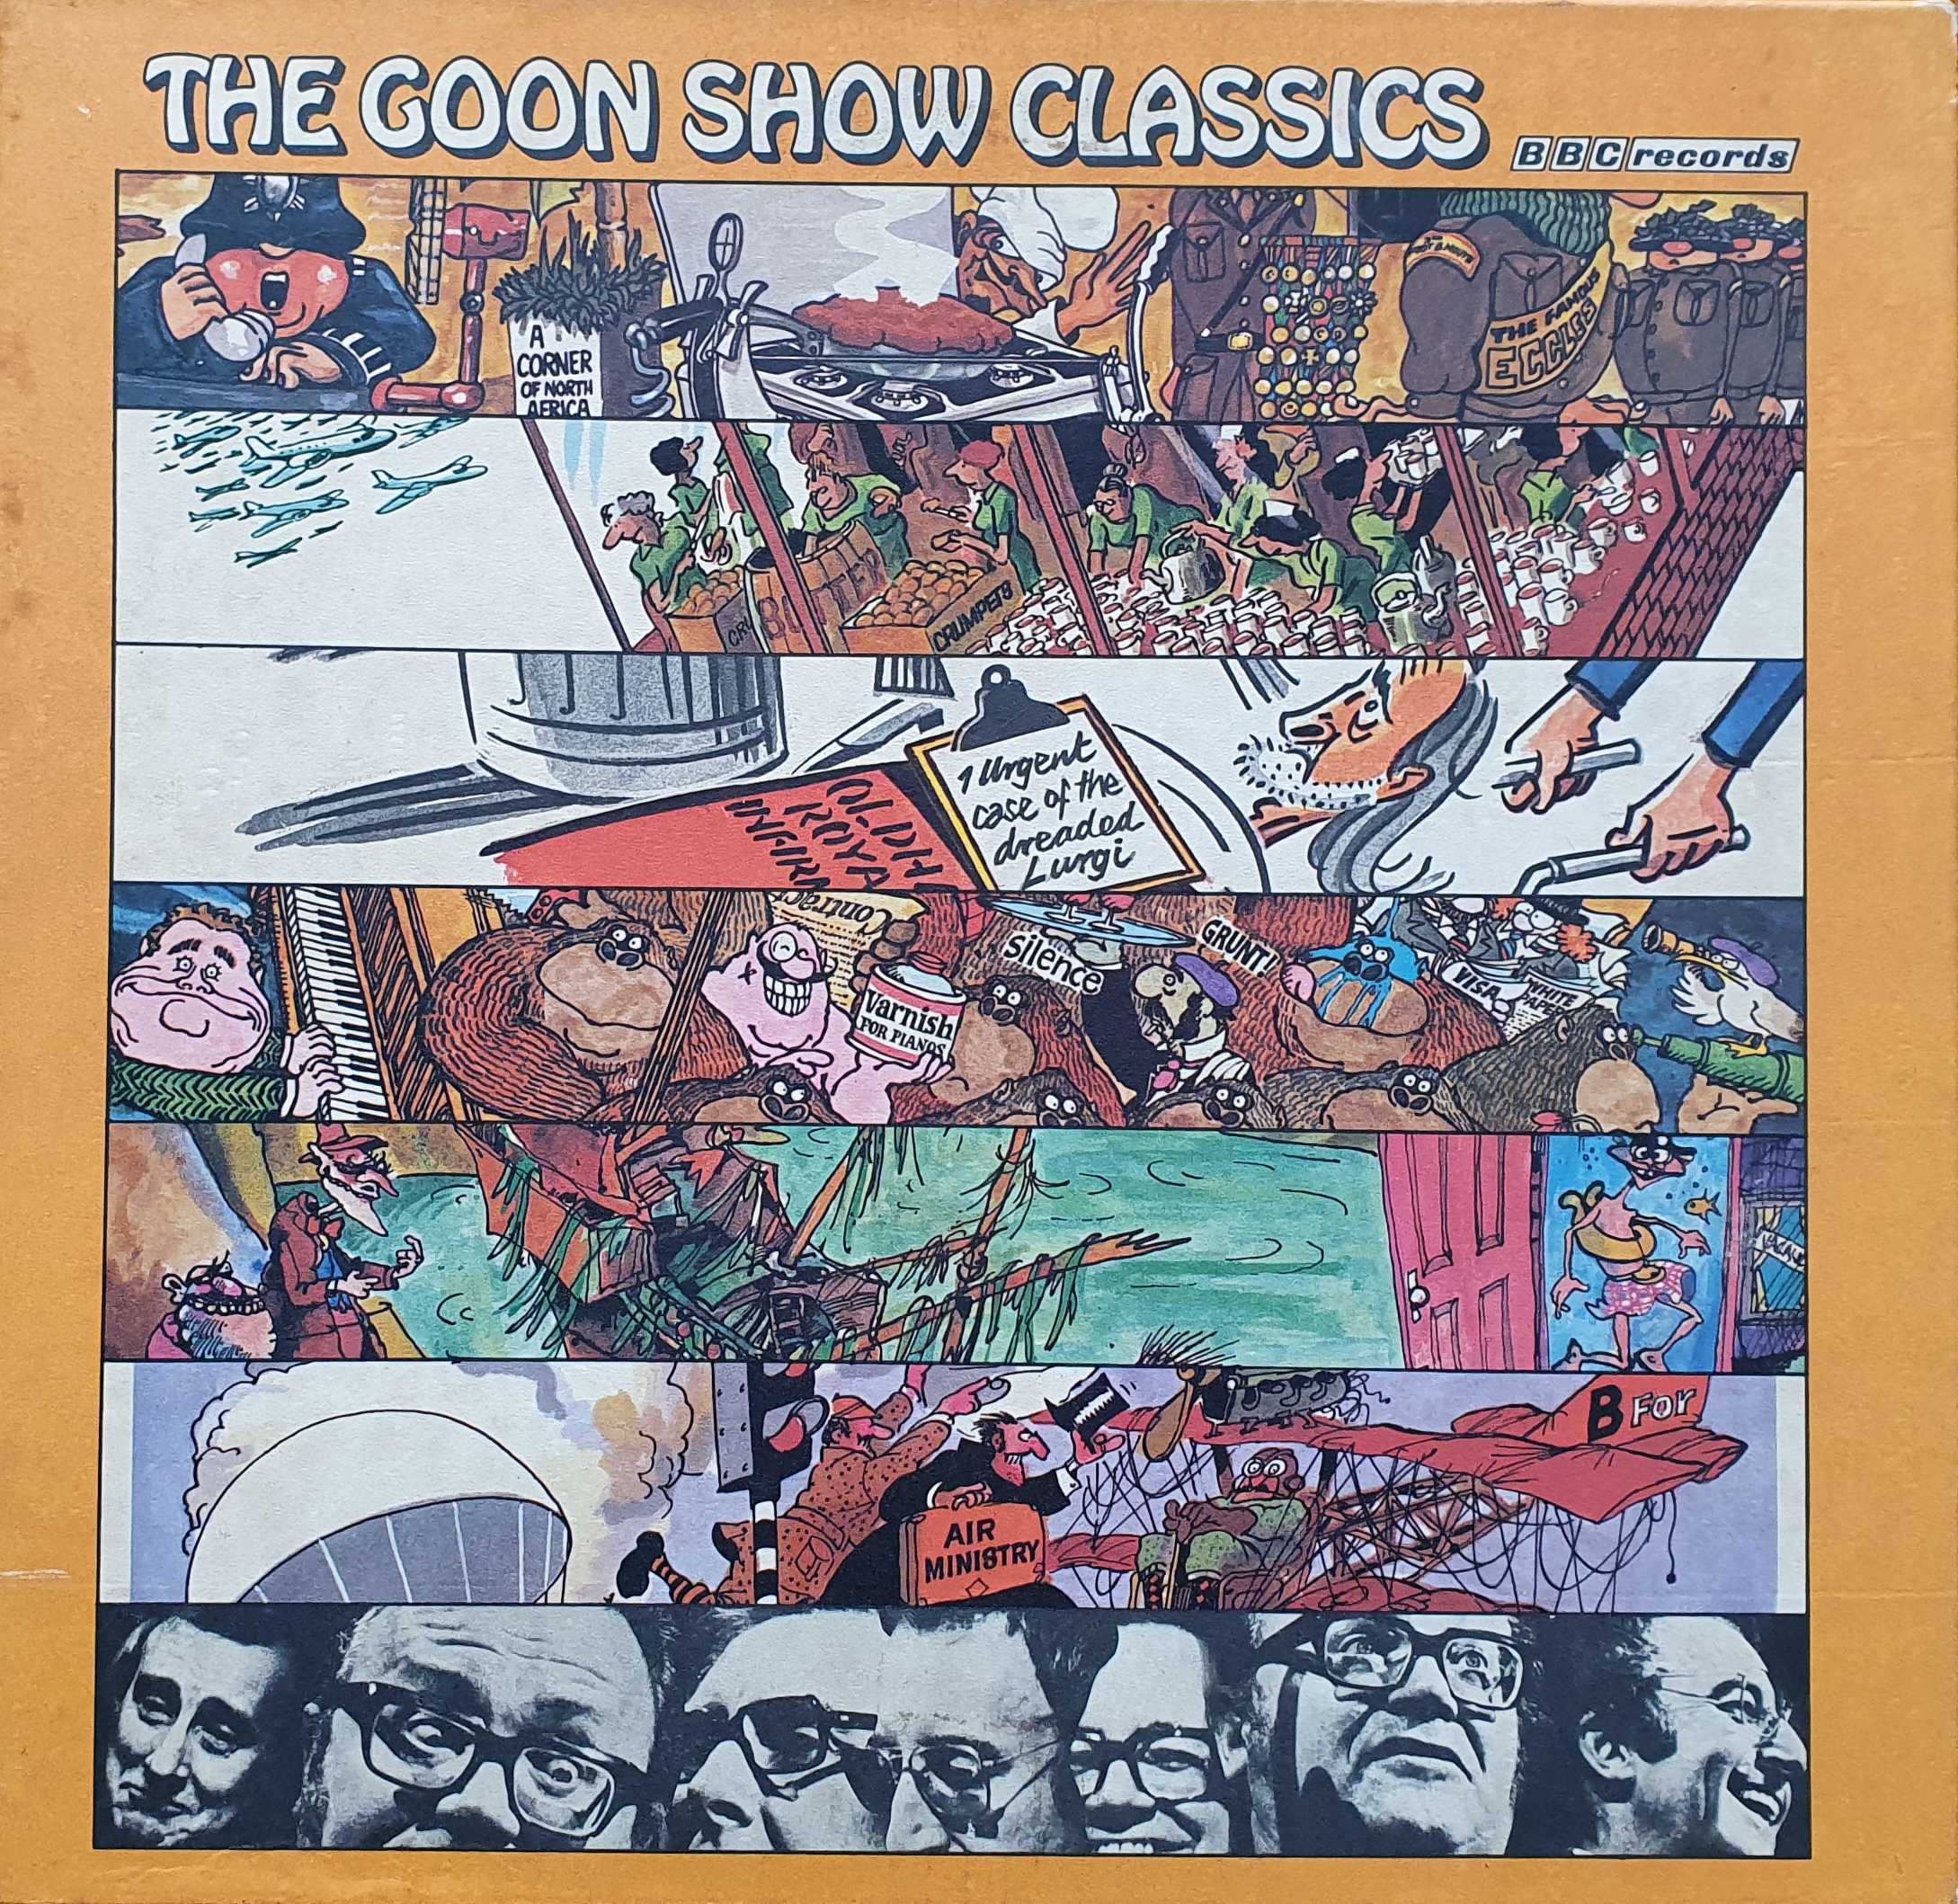 Picture of 2660 127 The Goon Show classics (Australian import) by artist The Goons from the BBC albums - Records and Tapes library